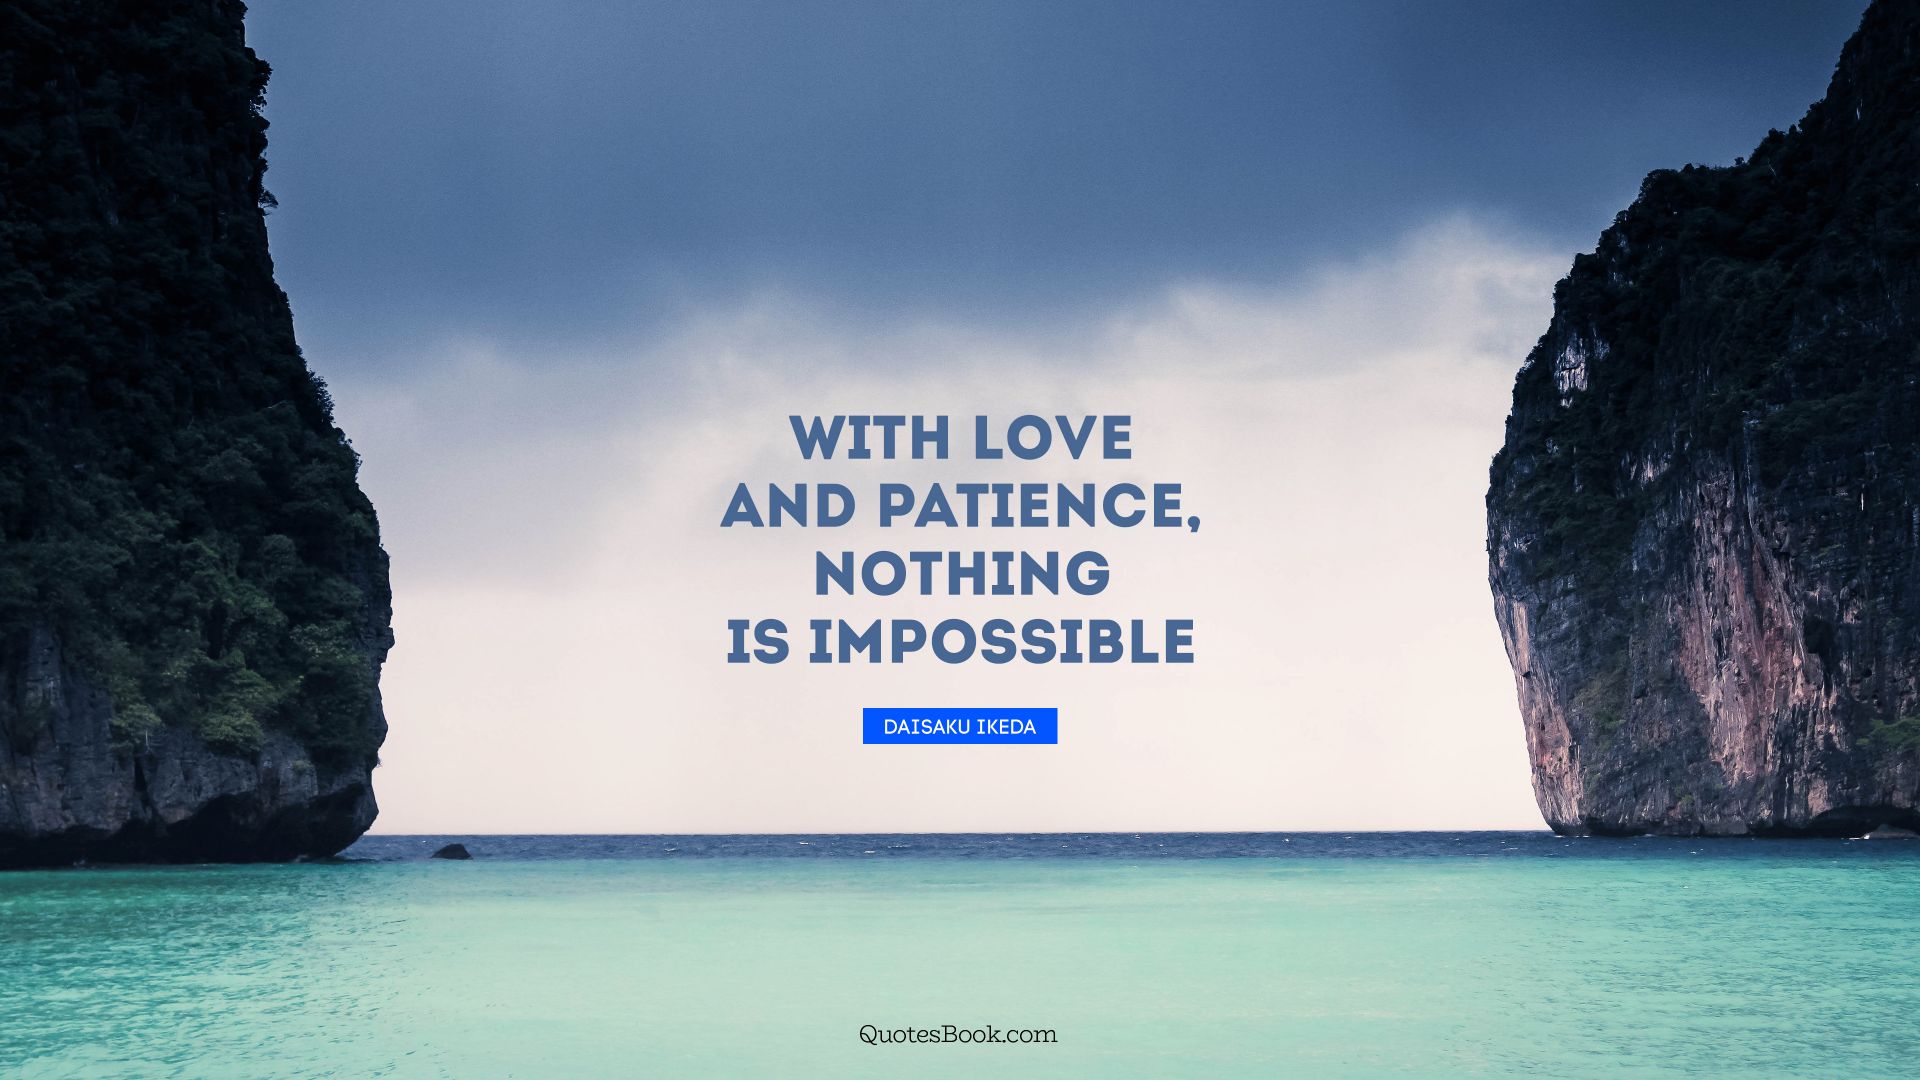 With love and patience, nothing is impossible. - Quote by Daisaku Ikeda